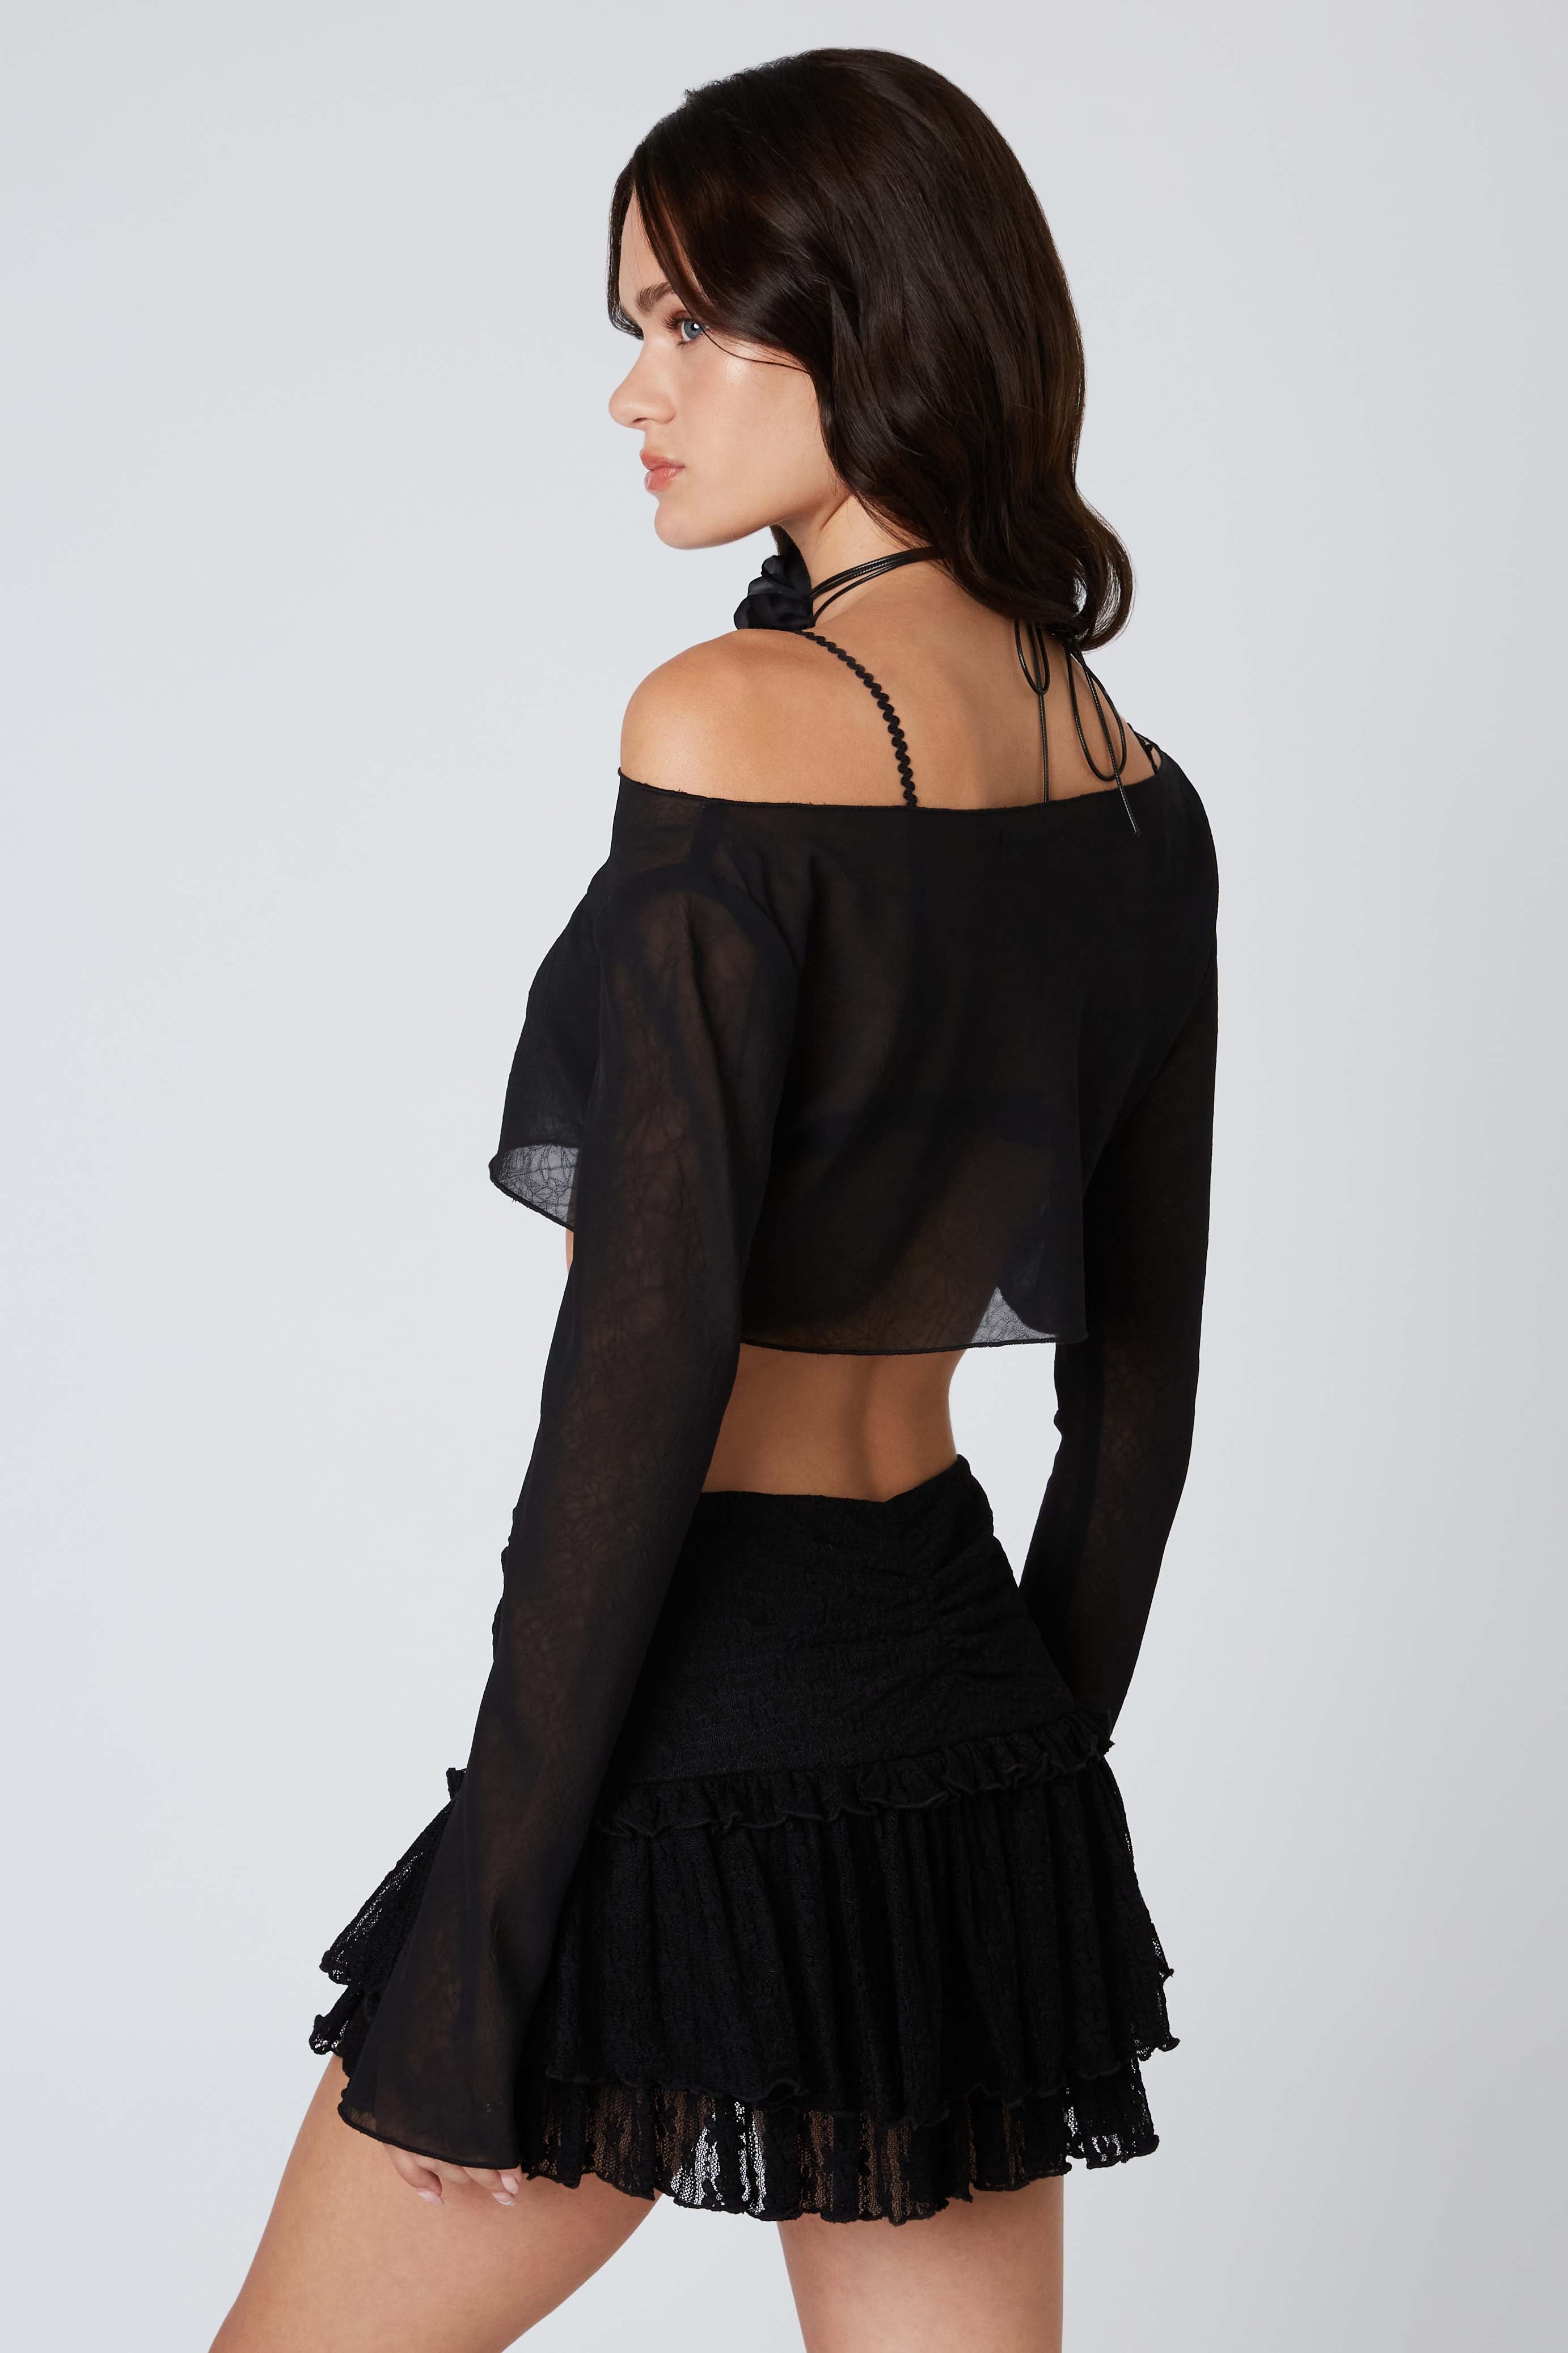 Mesh Cropped Long Sleeve Top in Black Back View